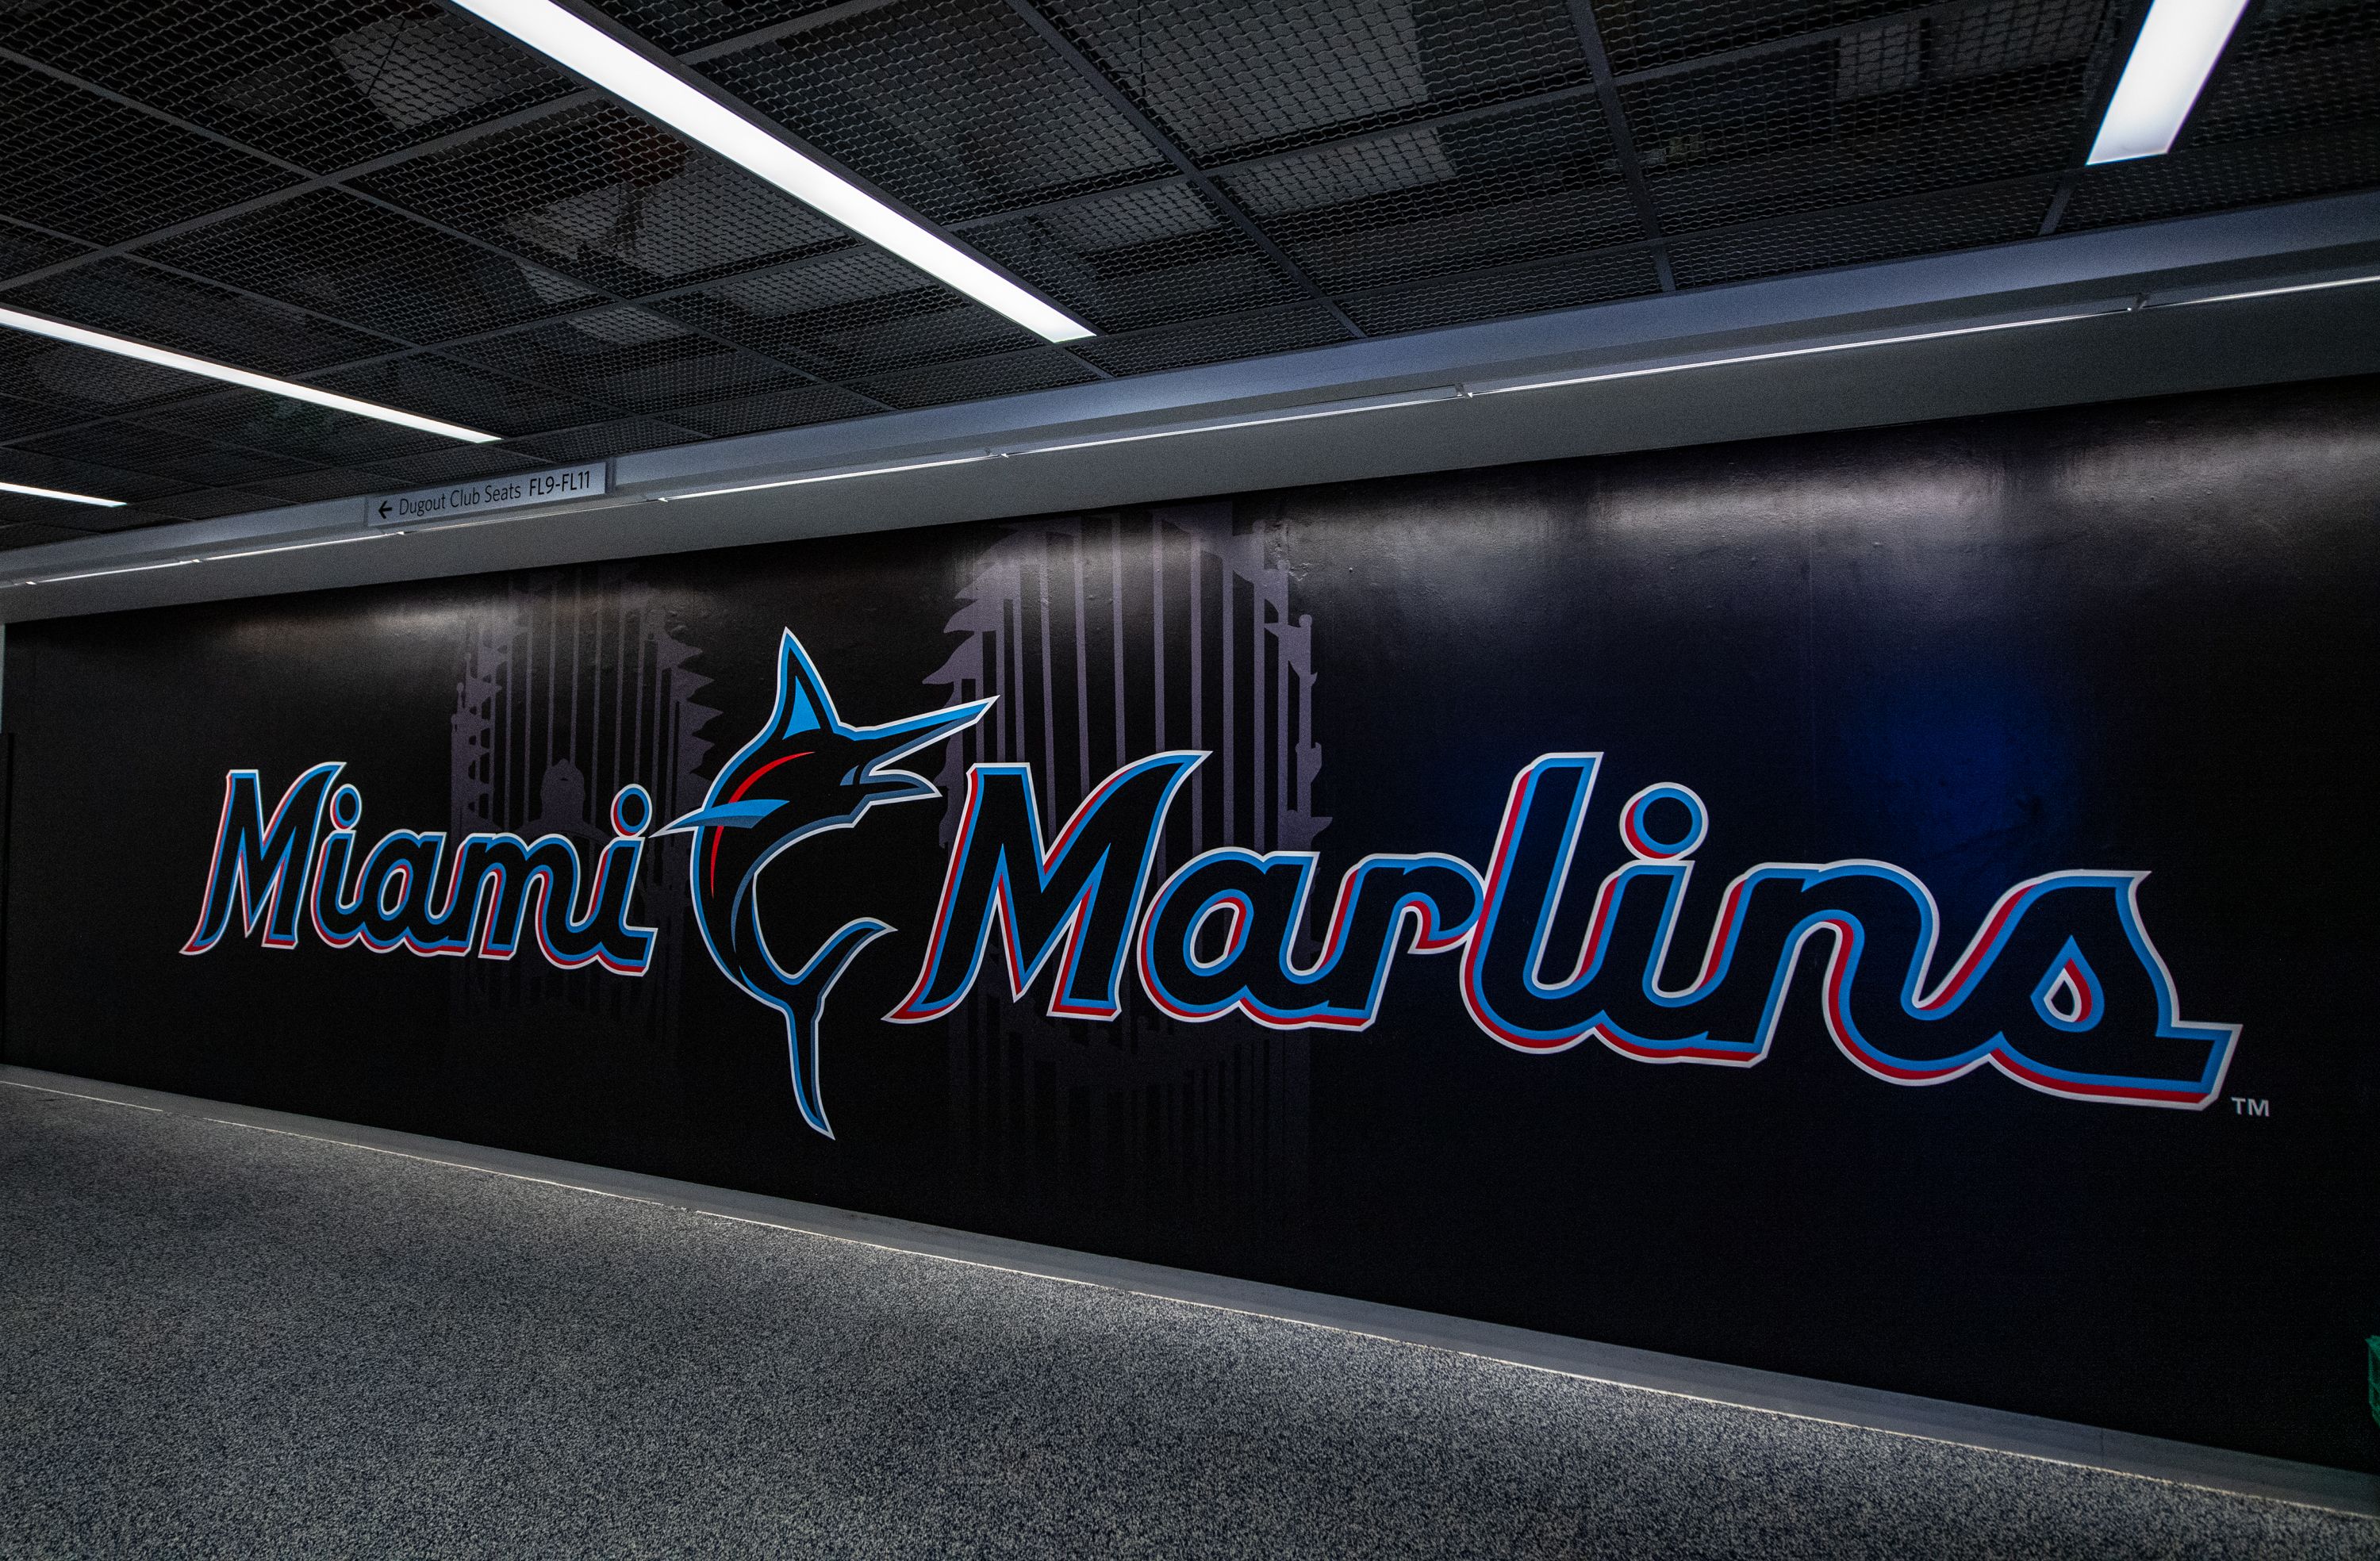 Miami Marlins - Miami Marlins updated their cover photo.